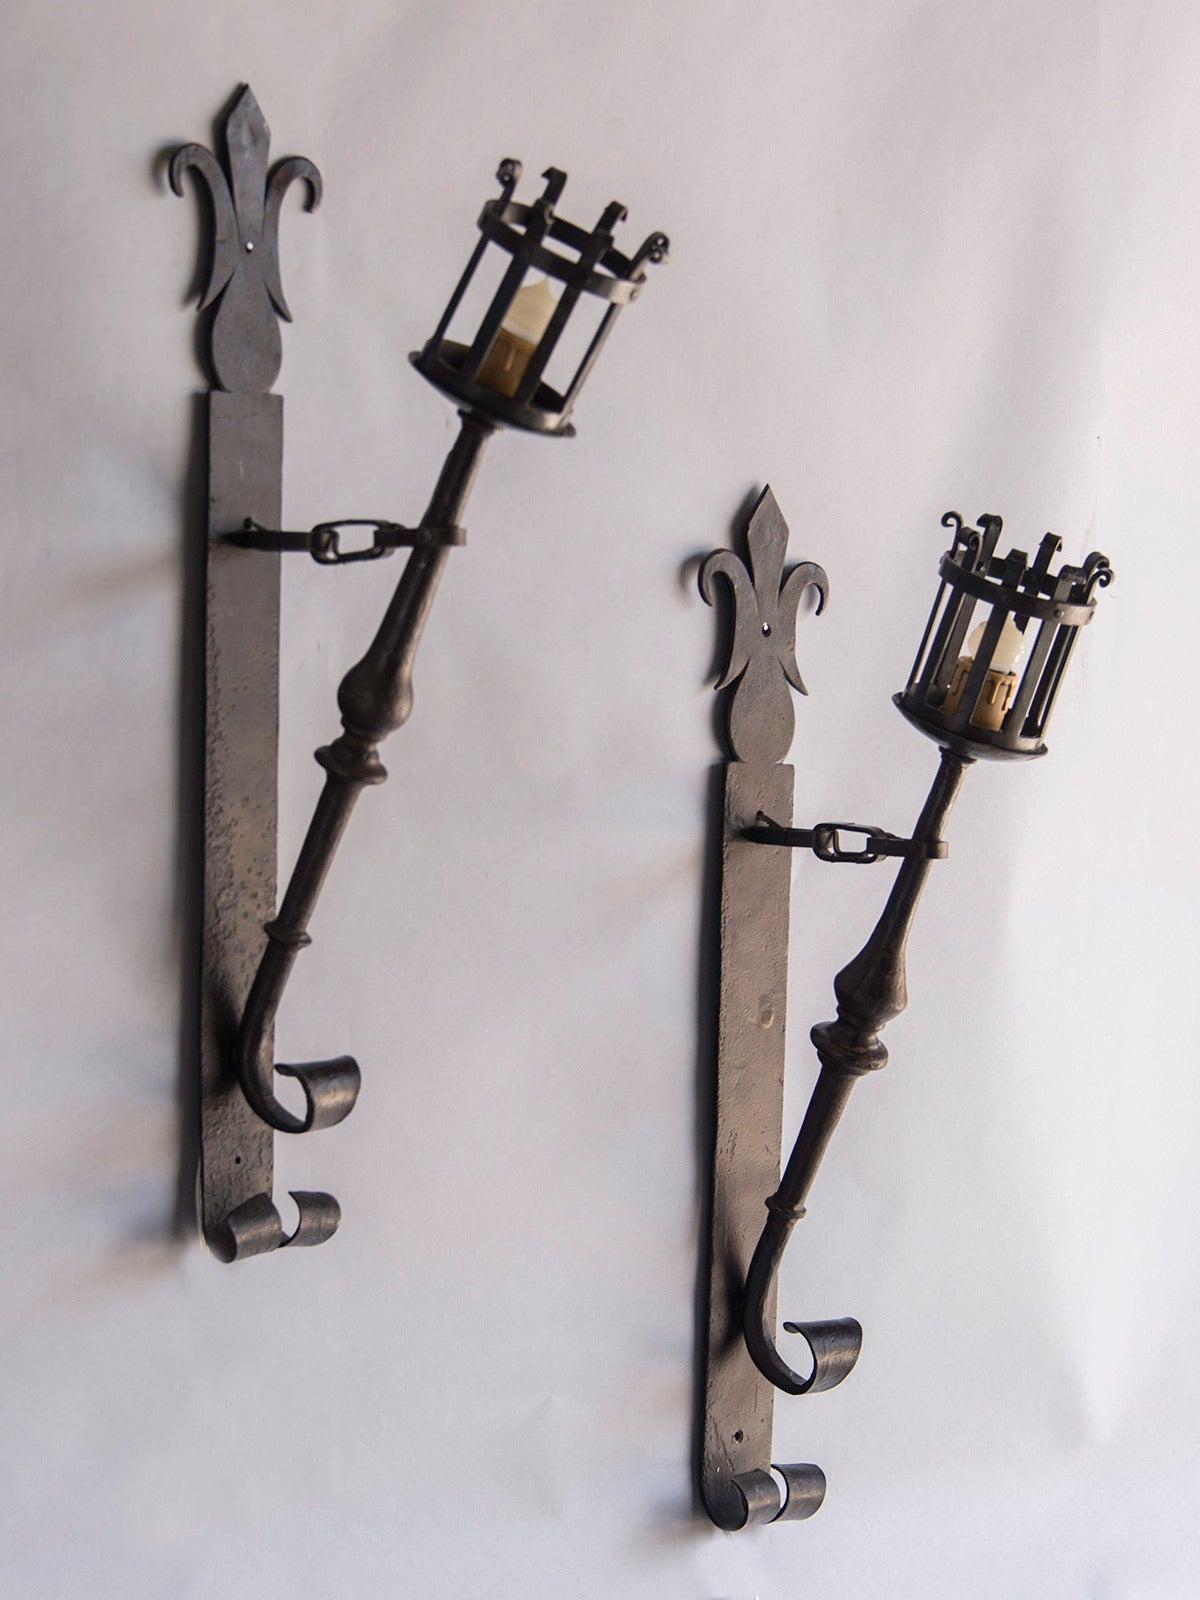 Receive our new selections direct from 1stdibs by email each week. Please click Follow Dealer below and see them first!

These imposing vintage French sconces circa 1910 have a boldly sculptural feel and have been electrified to be mounted